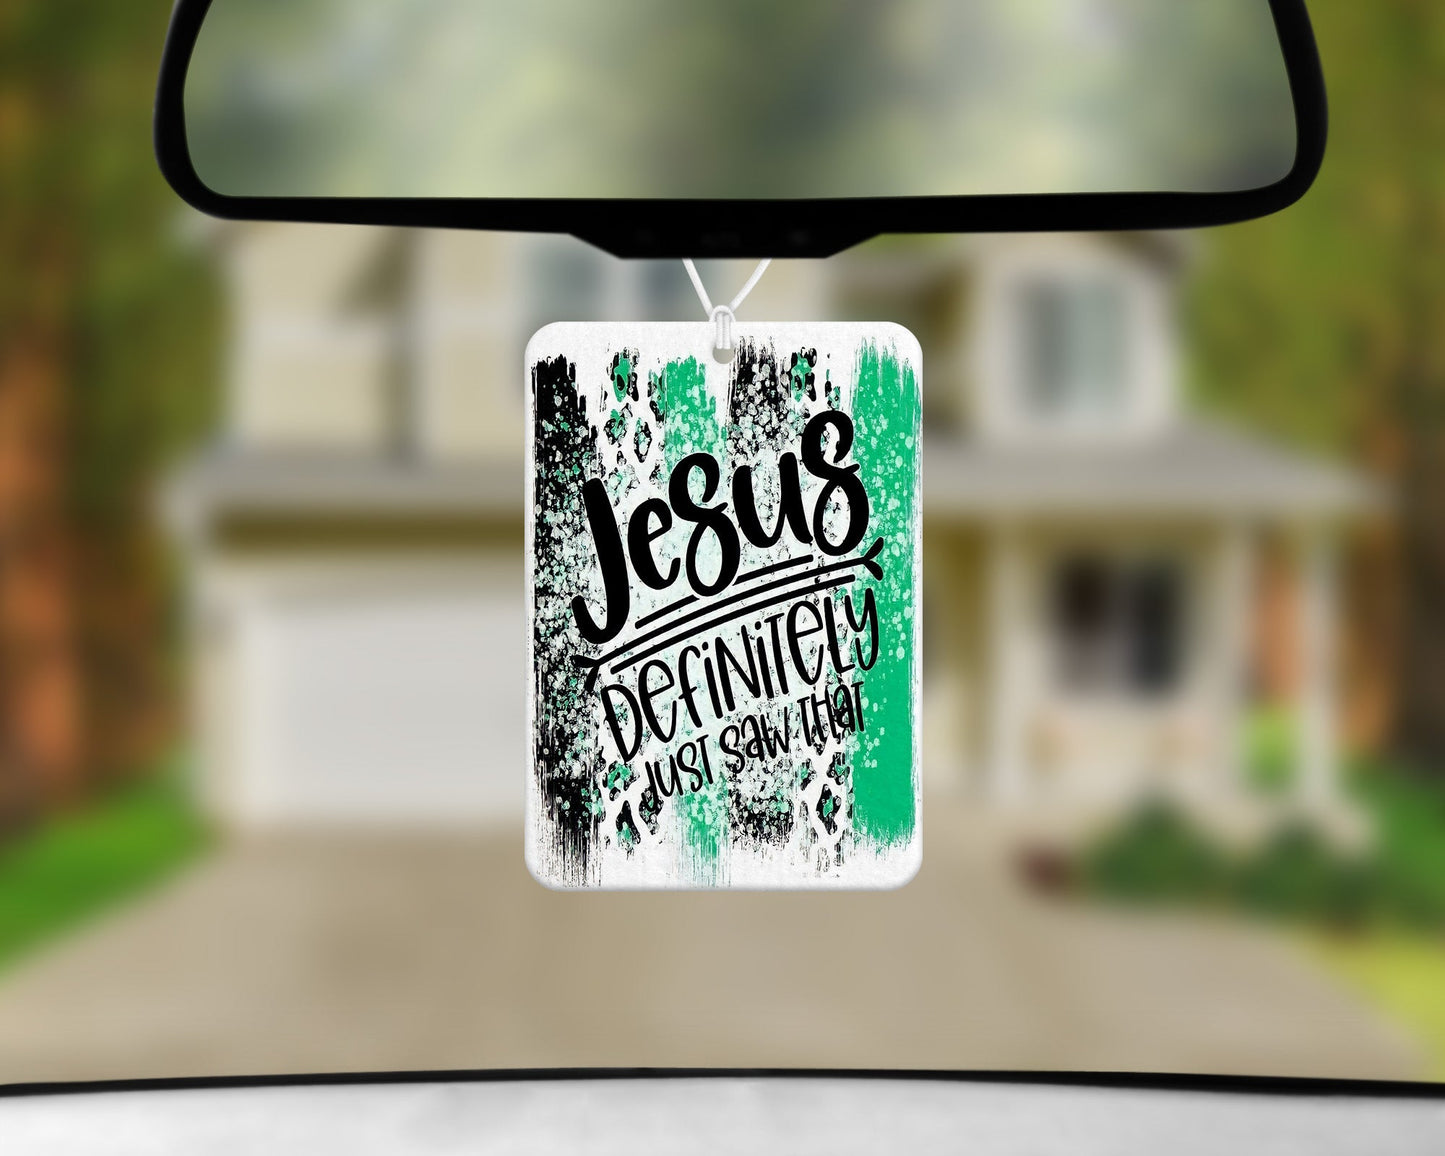 Jesus Definitely Just Saw That|Freshie|Includes Scent Bottle - Vehicle Air Freshener